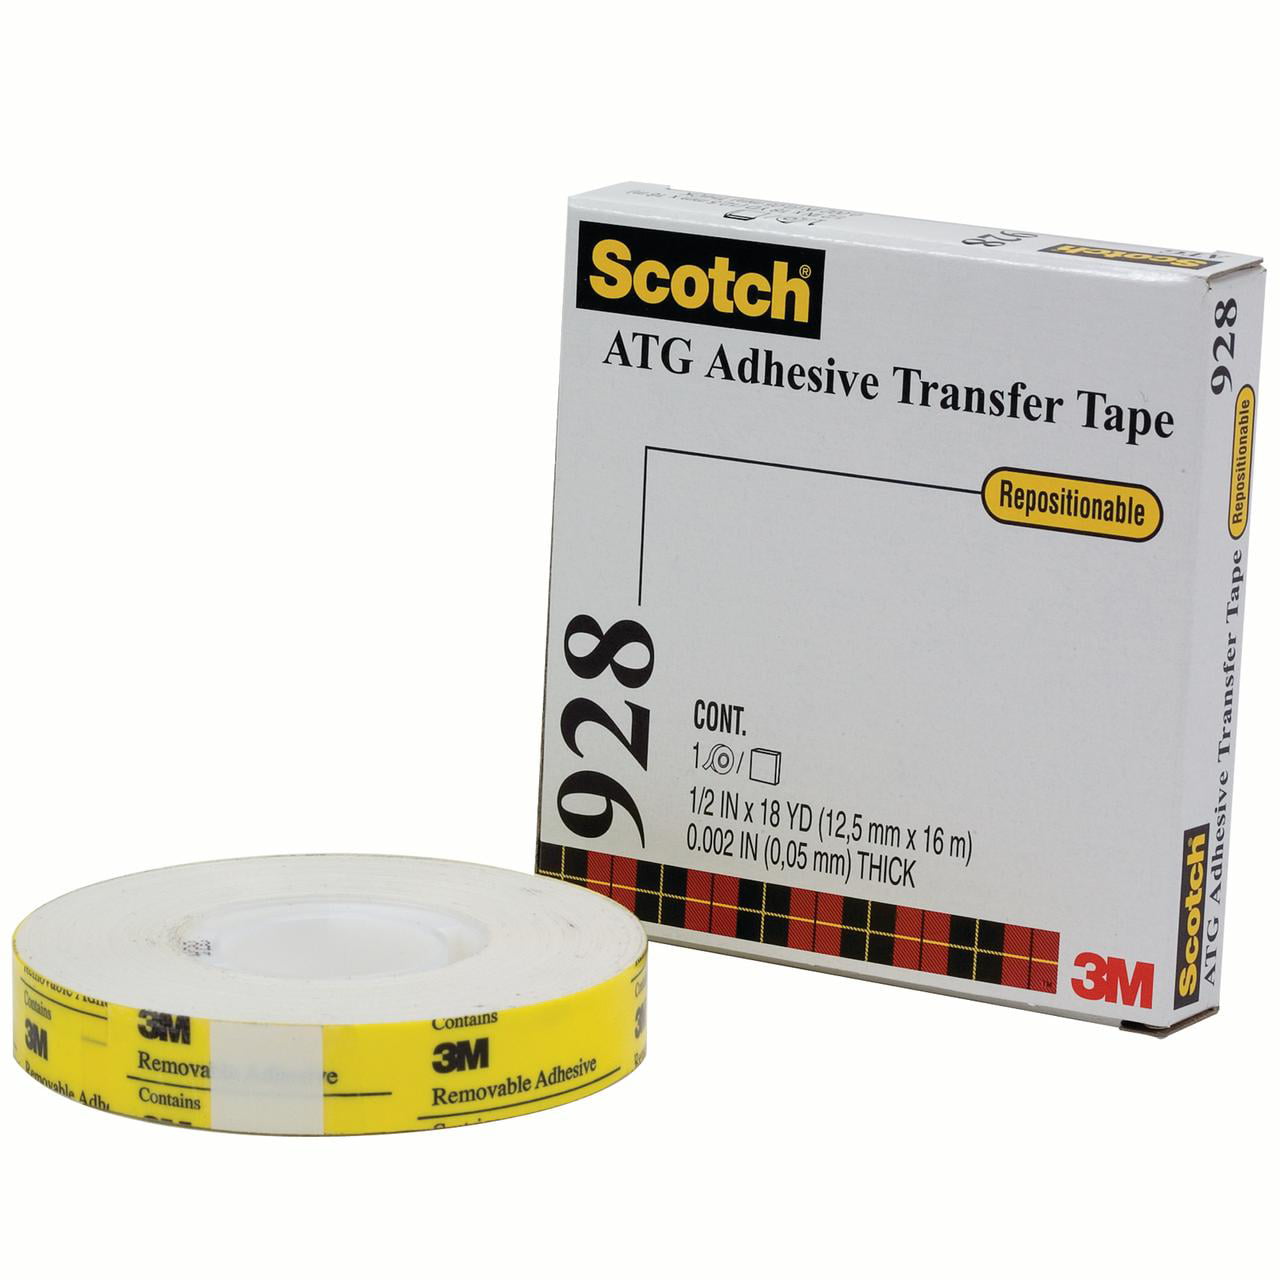 Scotch T9689286pk 0.5 In. X 36 Yards White Repositionable Adhesive Transfer Tape, Pack Of 6 - 6 Per Case